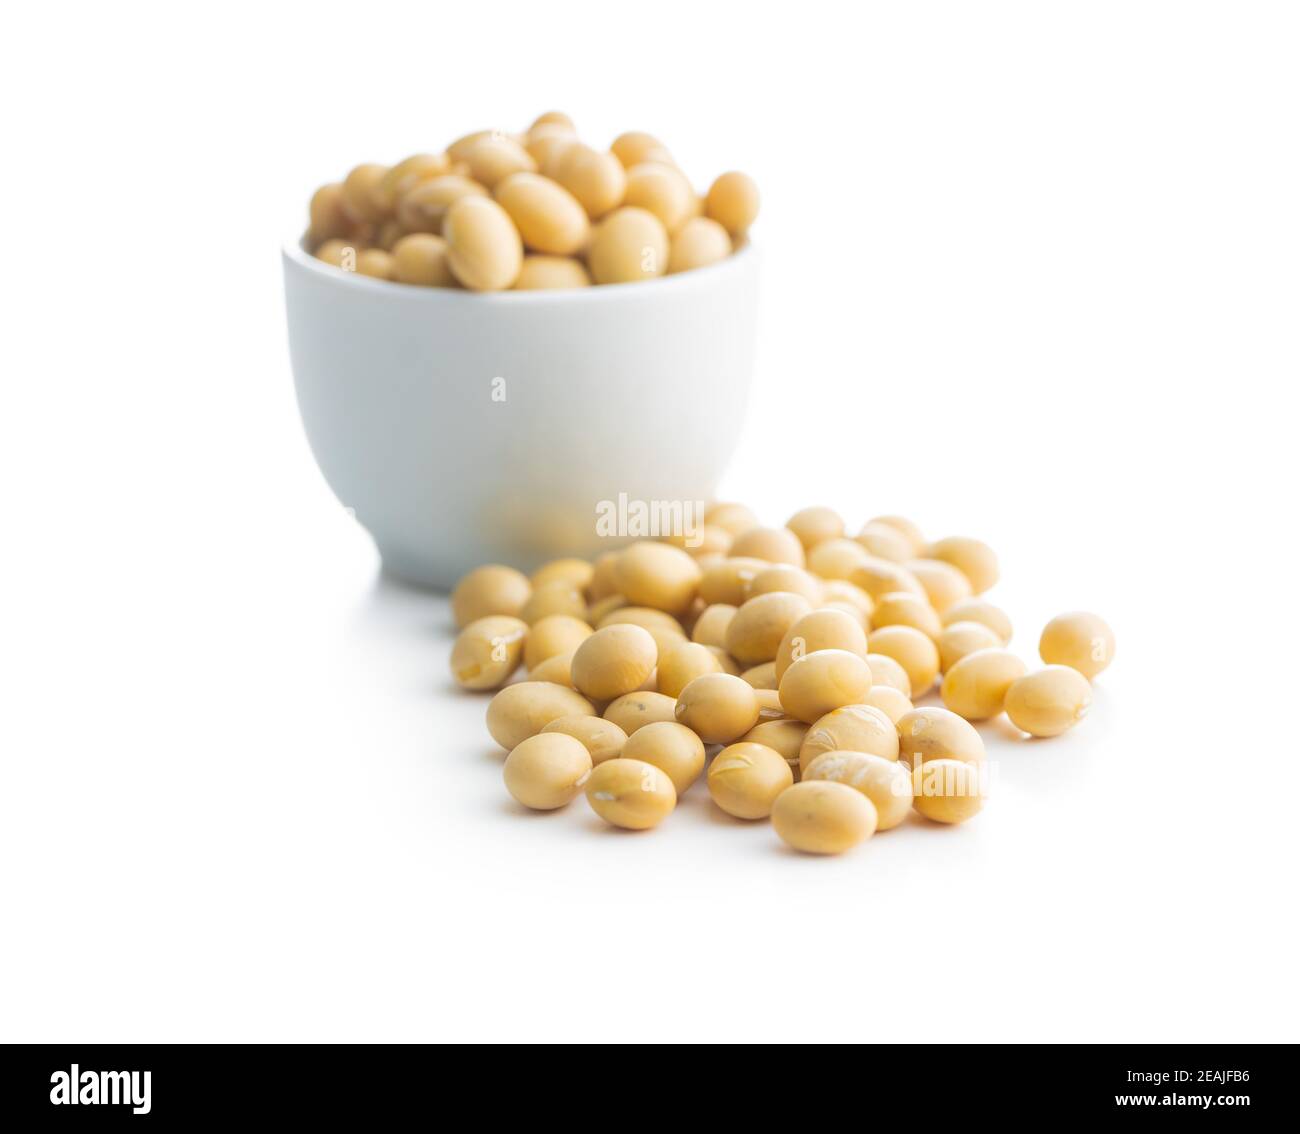 Dried soy beans. Stock Photo